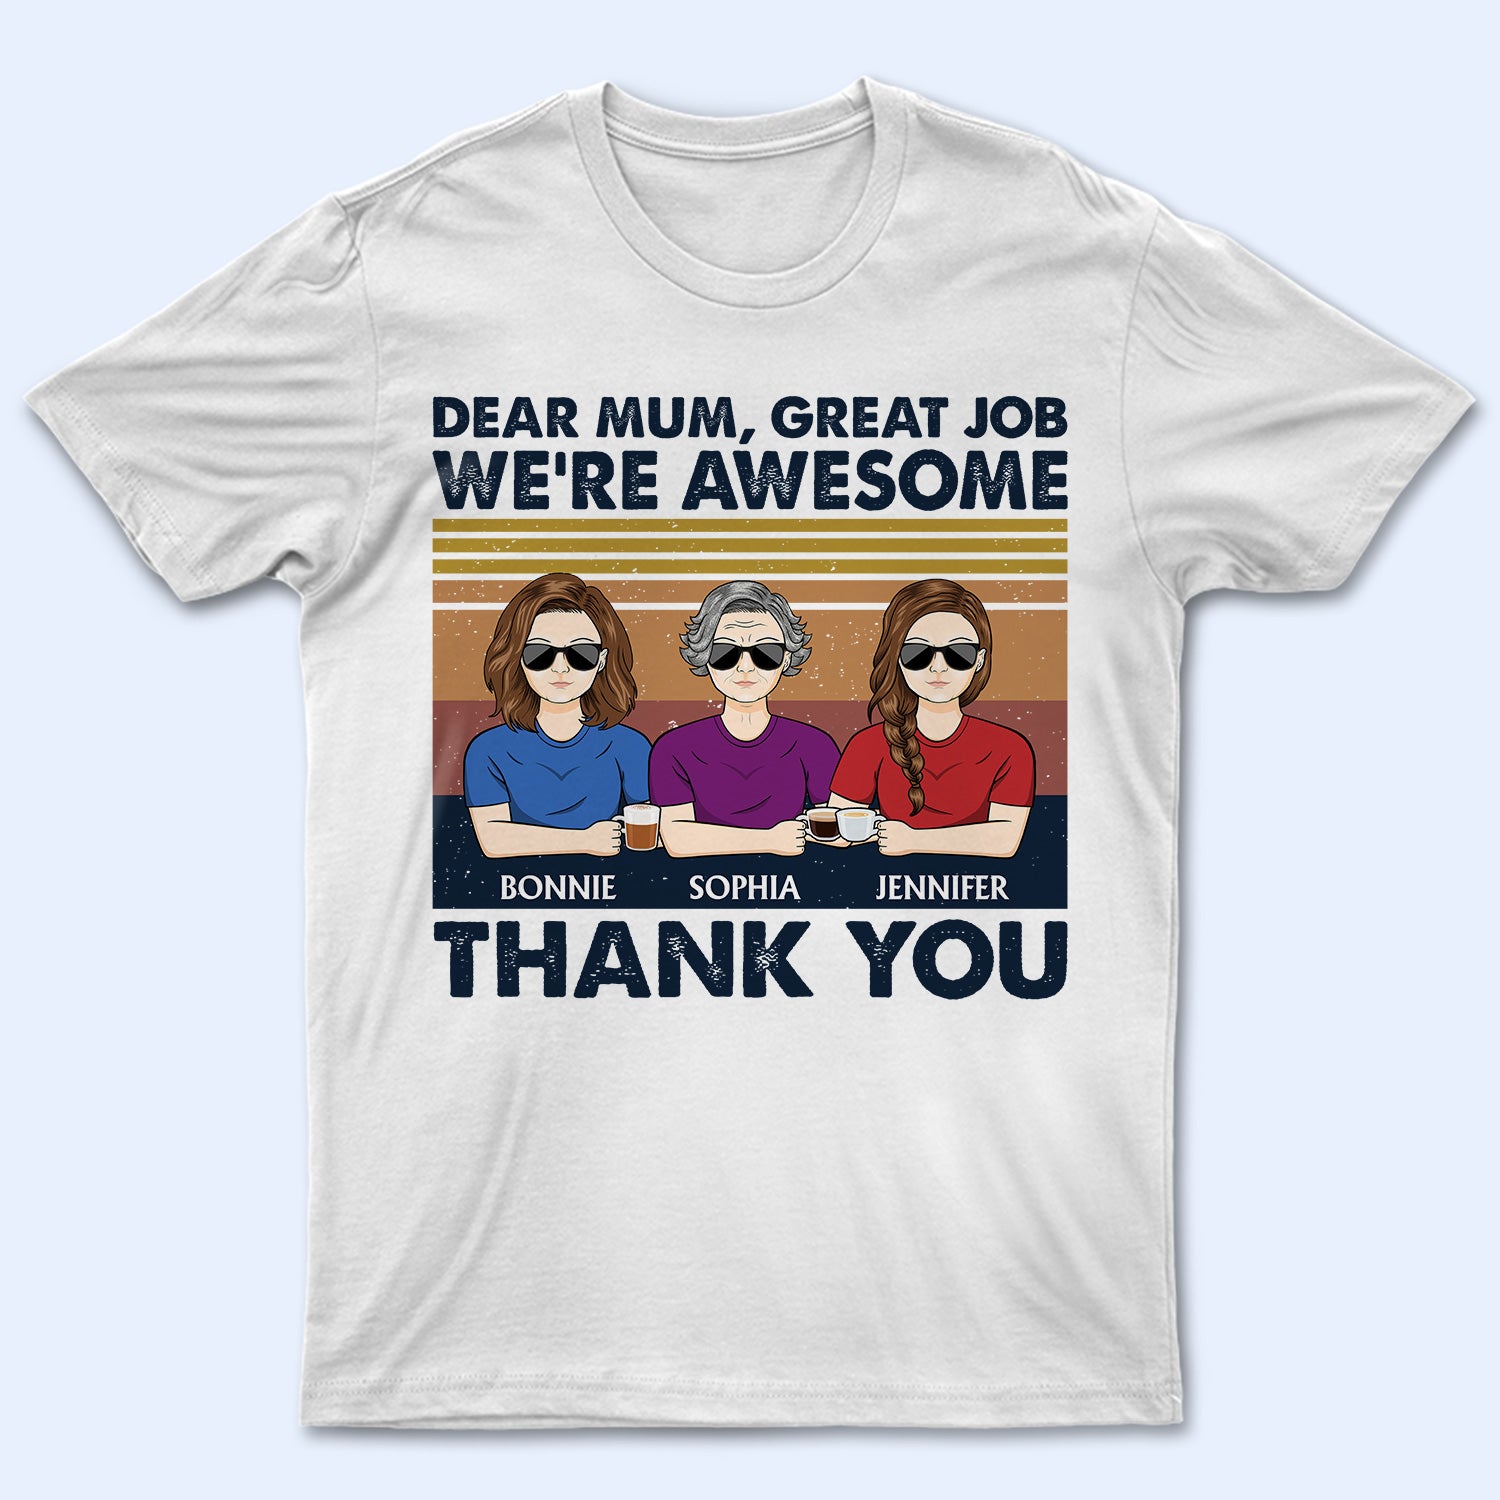 Dear Mum Great Job I'm Awesome Thank You - Birthday, Loving Gift For Mother, Grandma, Grandmother - Personalized Custom T Shirt